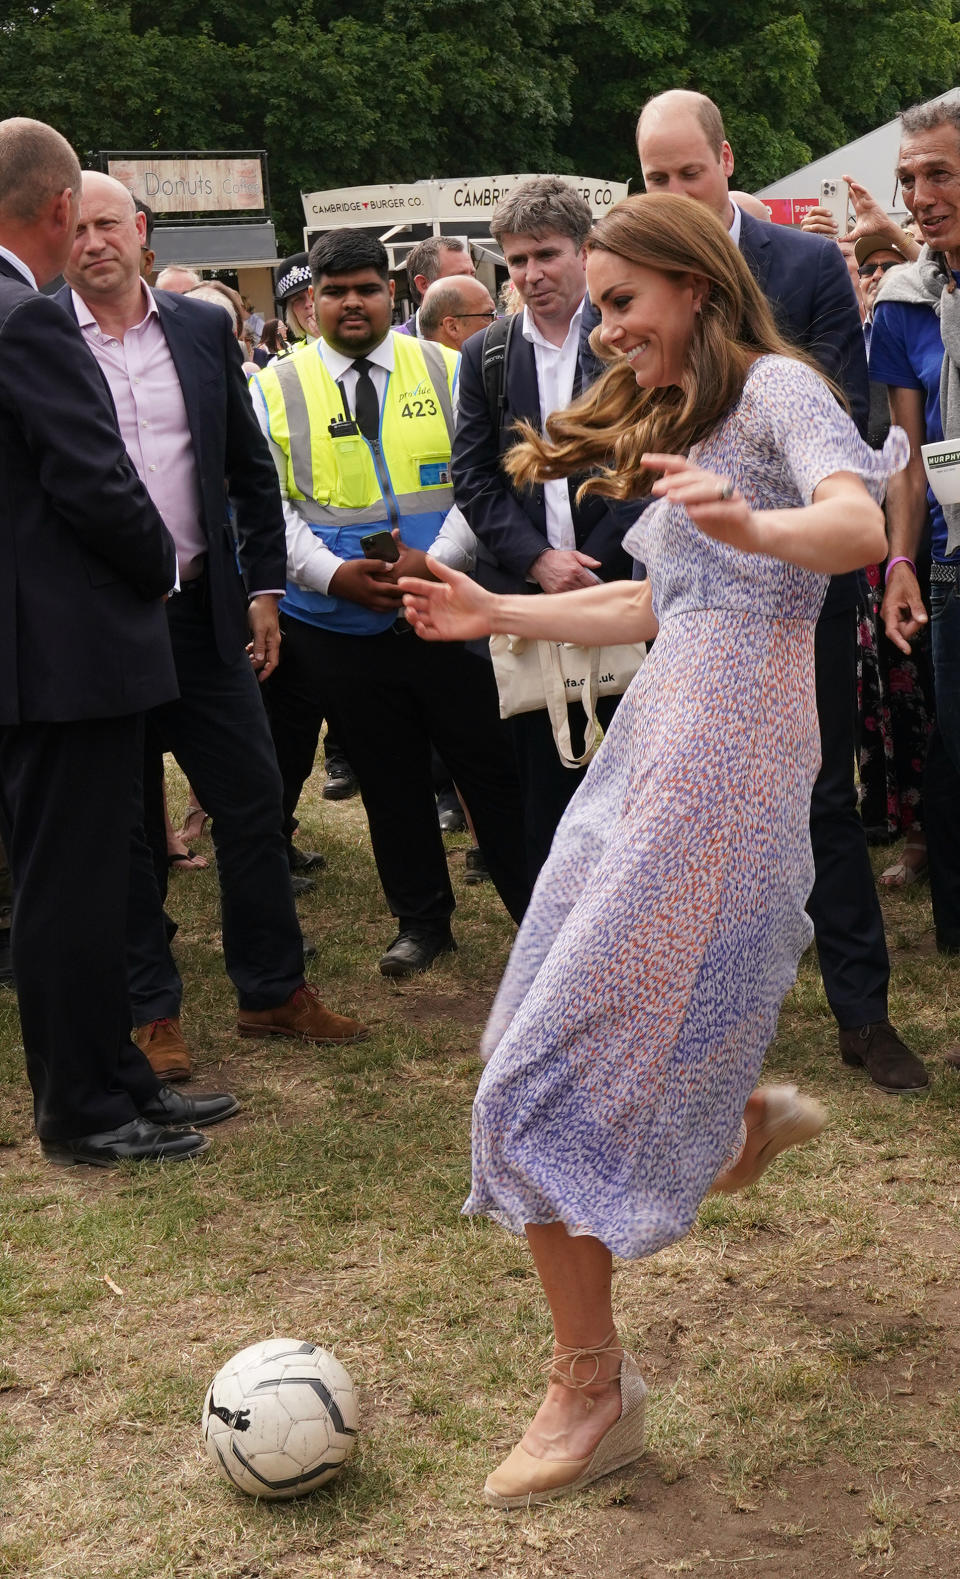 The Duchess of Cambridge wears her Castaner wedges for 'active' appearances, such as the Cambridgeshire County Day where she was seen playing football with locals. (Getty Images)